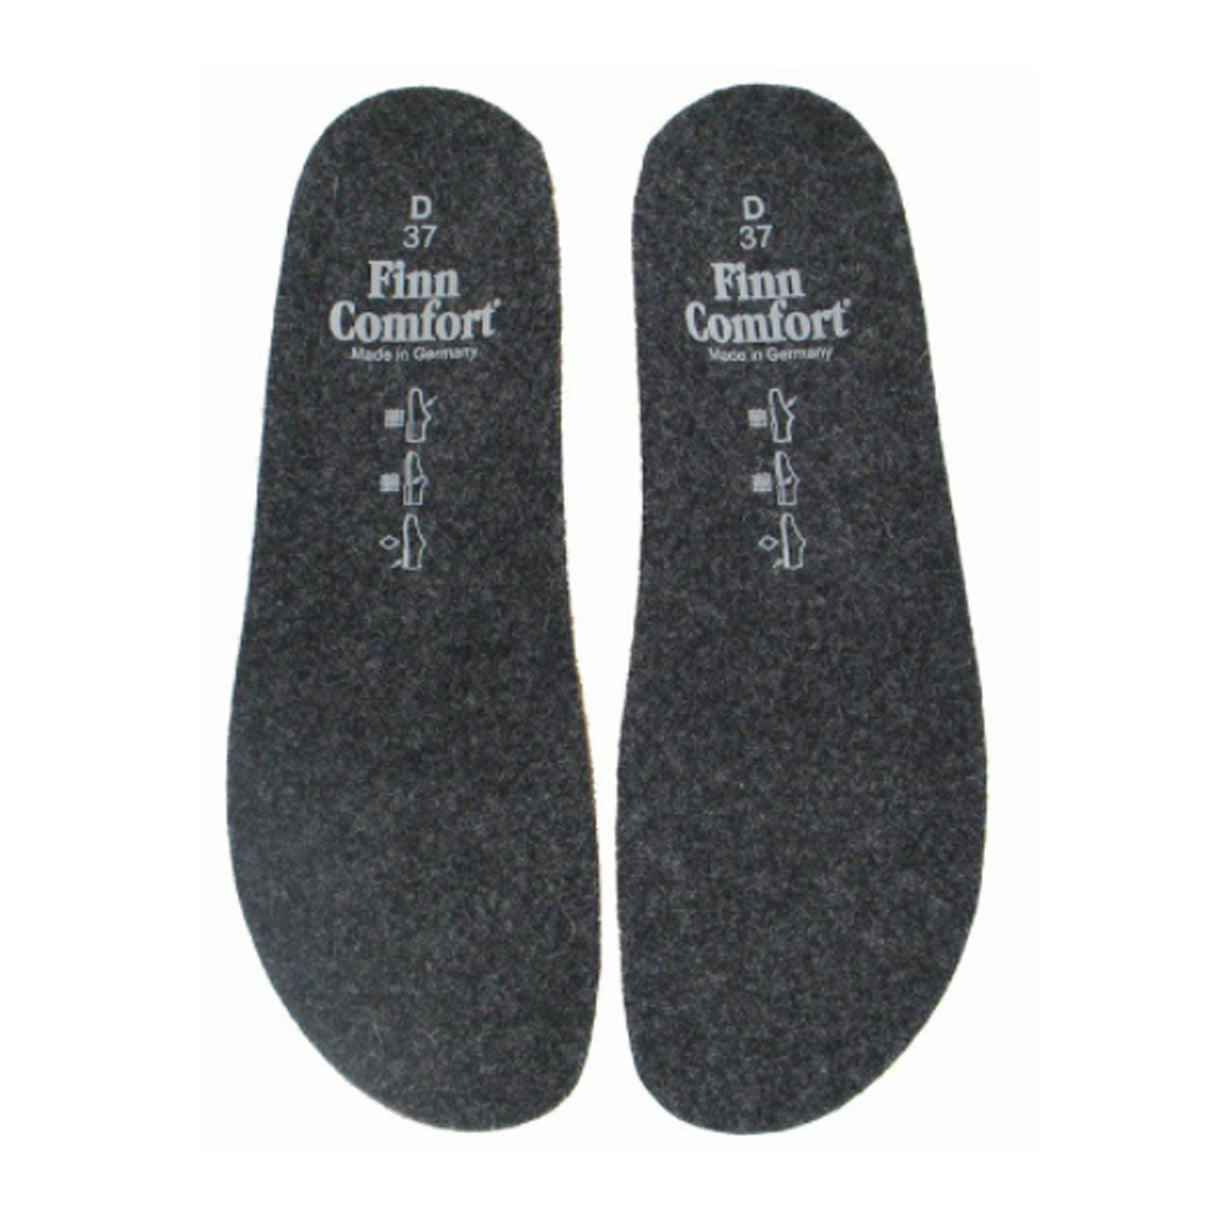 Finn Comfort Classic Flat Non Perforated Replacement Footbed (Unisex) - Grey Felt Accessories - Orthotics/Insoles - Full Length - The Heel Shoe Fitters